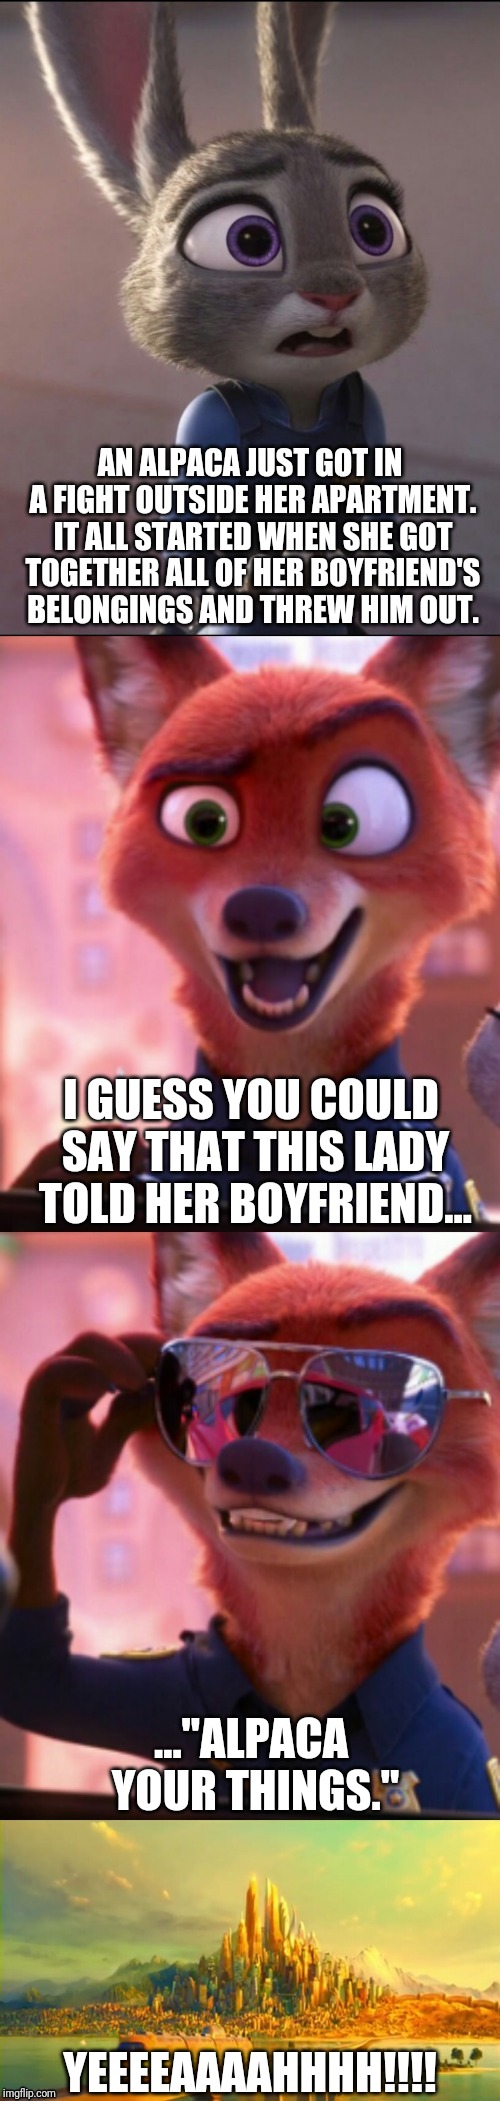 CSI: Zootopia 17 | AN ALPACA JUST GOT IN A FIGHT OUTSIDE HER APARTMENT. IT ALL STARTED WHEN SHE GOT TOGETHER ALL OF HER BOYFRIEND'S BELONGINGS AND THREW HIM OUT. I GUESS YOU COULD SAY THAT THIS LADY TOLD HER BOYFRIEND... ..."ALPACA YOUR THINGS."; YEEEEAAAAHHHH!!!! | image tagged in csi zootopia,zootopia,judy hopps,nick wilde,parody,funny | made w/ Imgflip meme maker